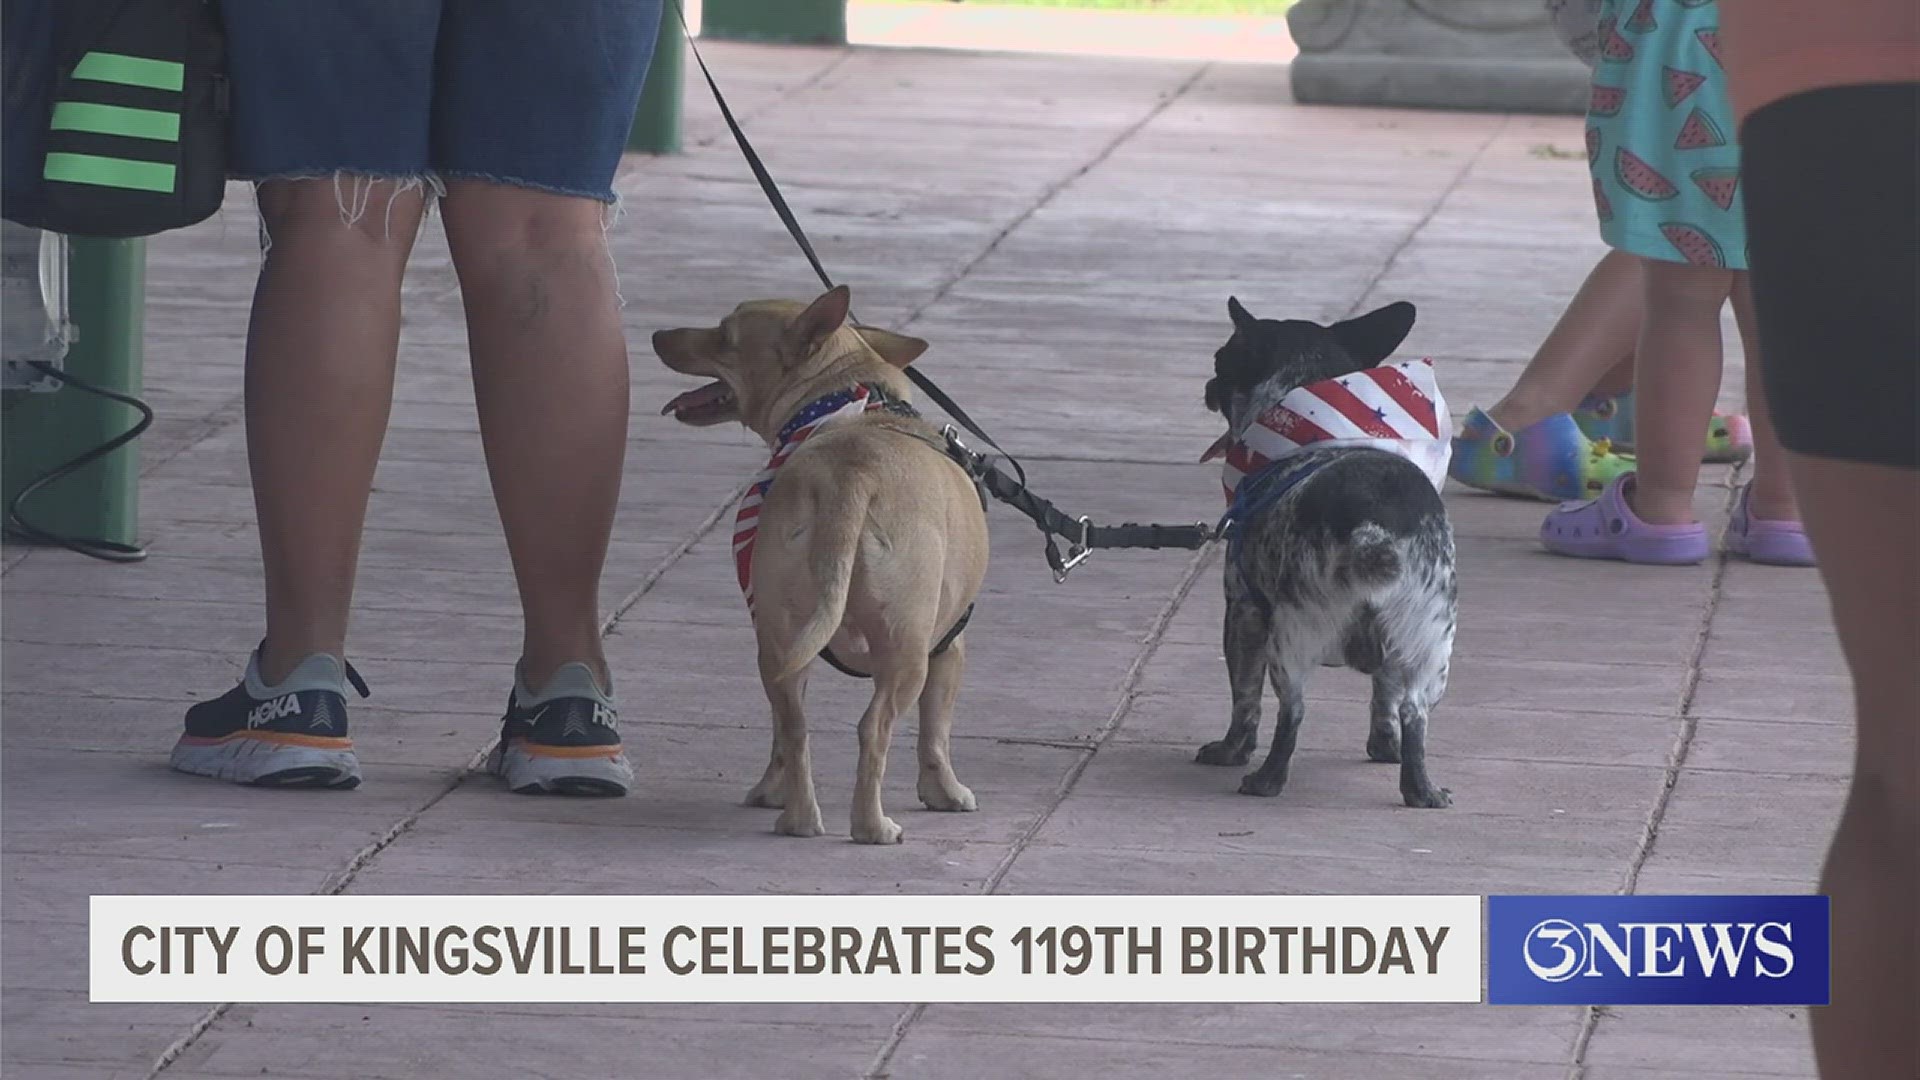 Four-legged friends joined in on the 4th of July fun.